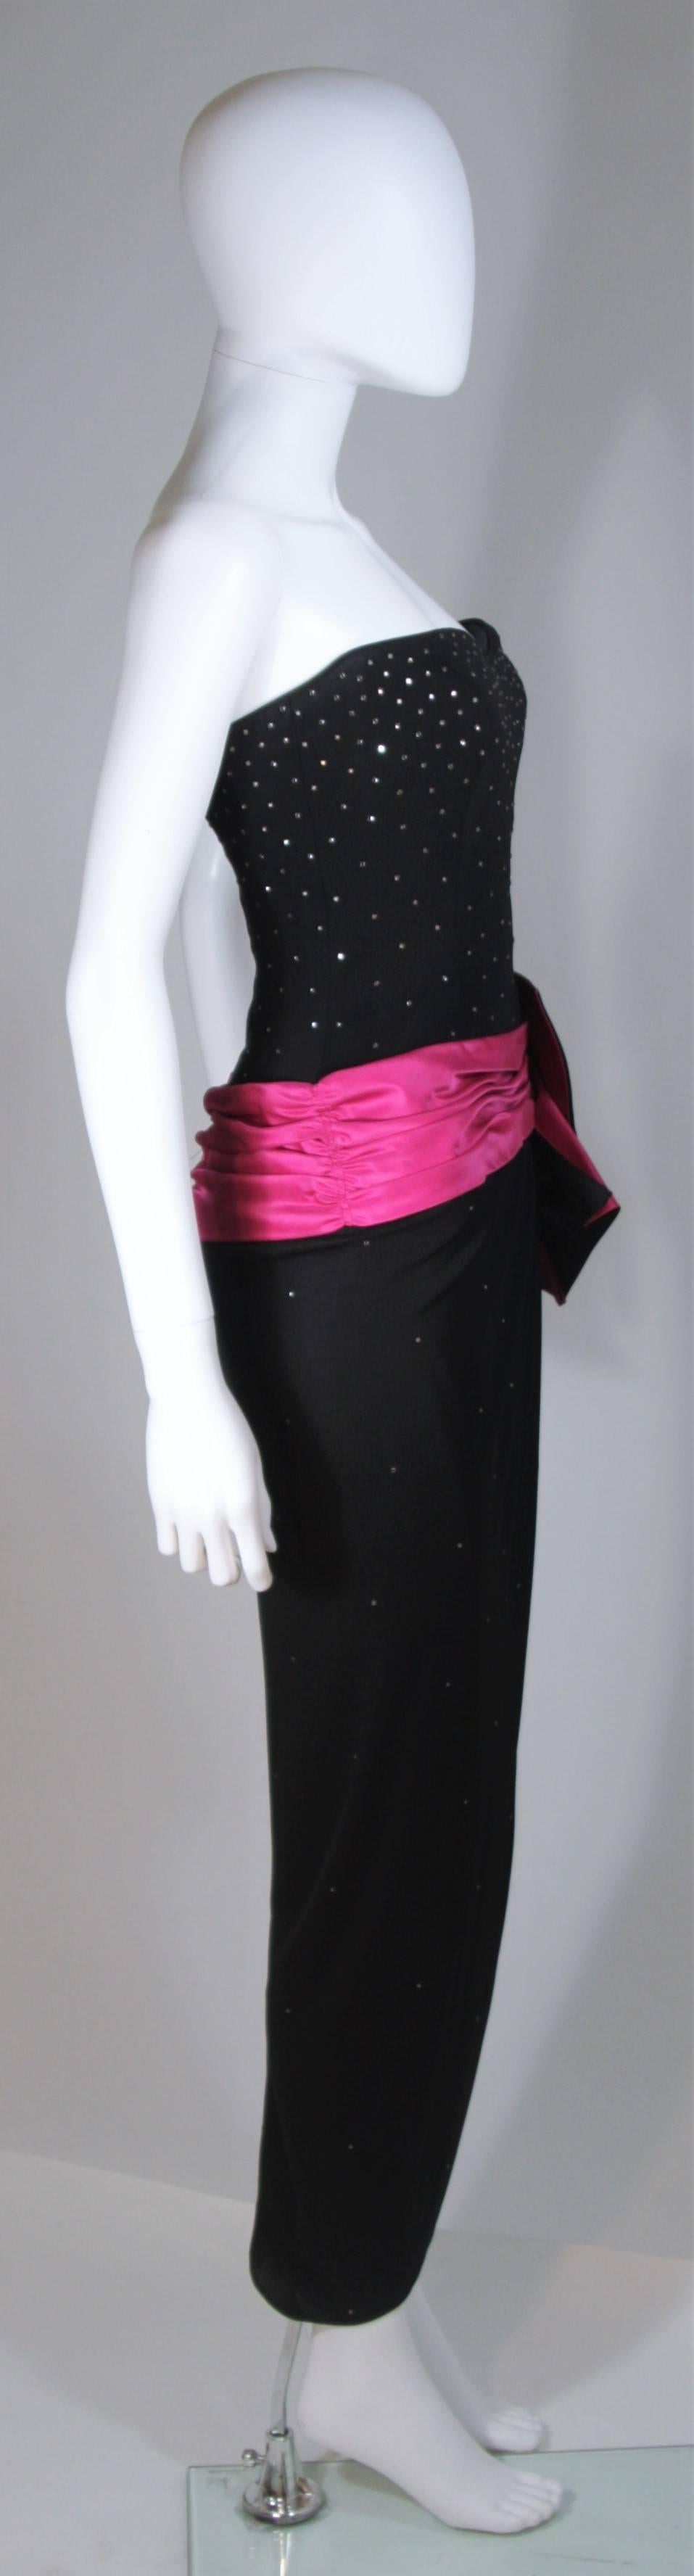 TRACEY MILLS 1980's Black Gown with Magenta Contrast and Large Bow Size 4-6 For Sale 1